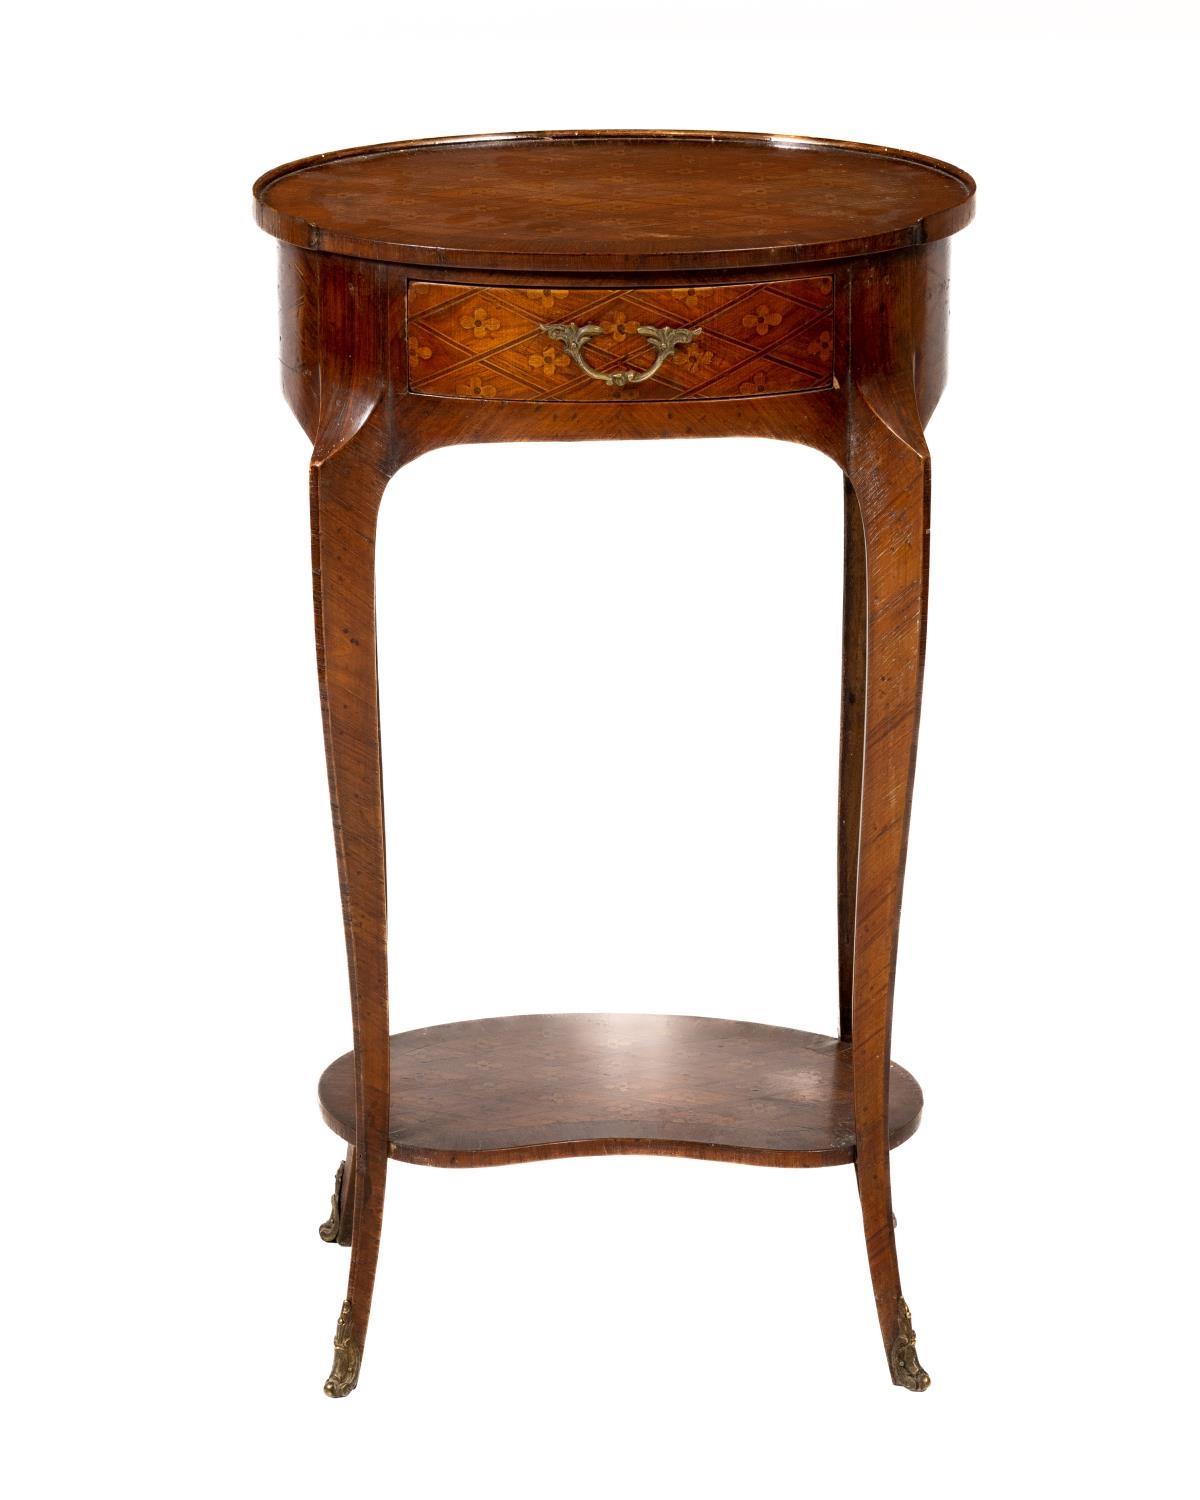 A two tier French marquetry and parquetry pedestal Table, the oval trellis top with rows of flower